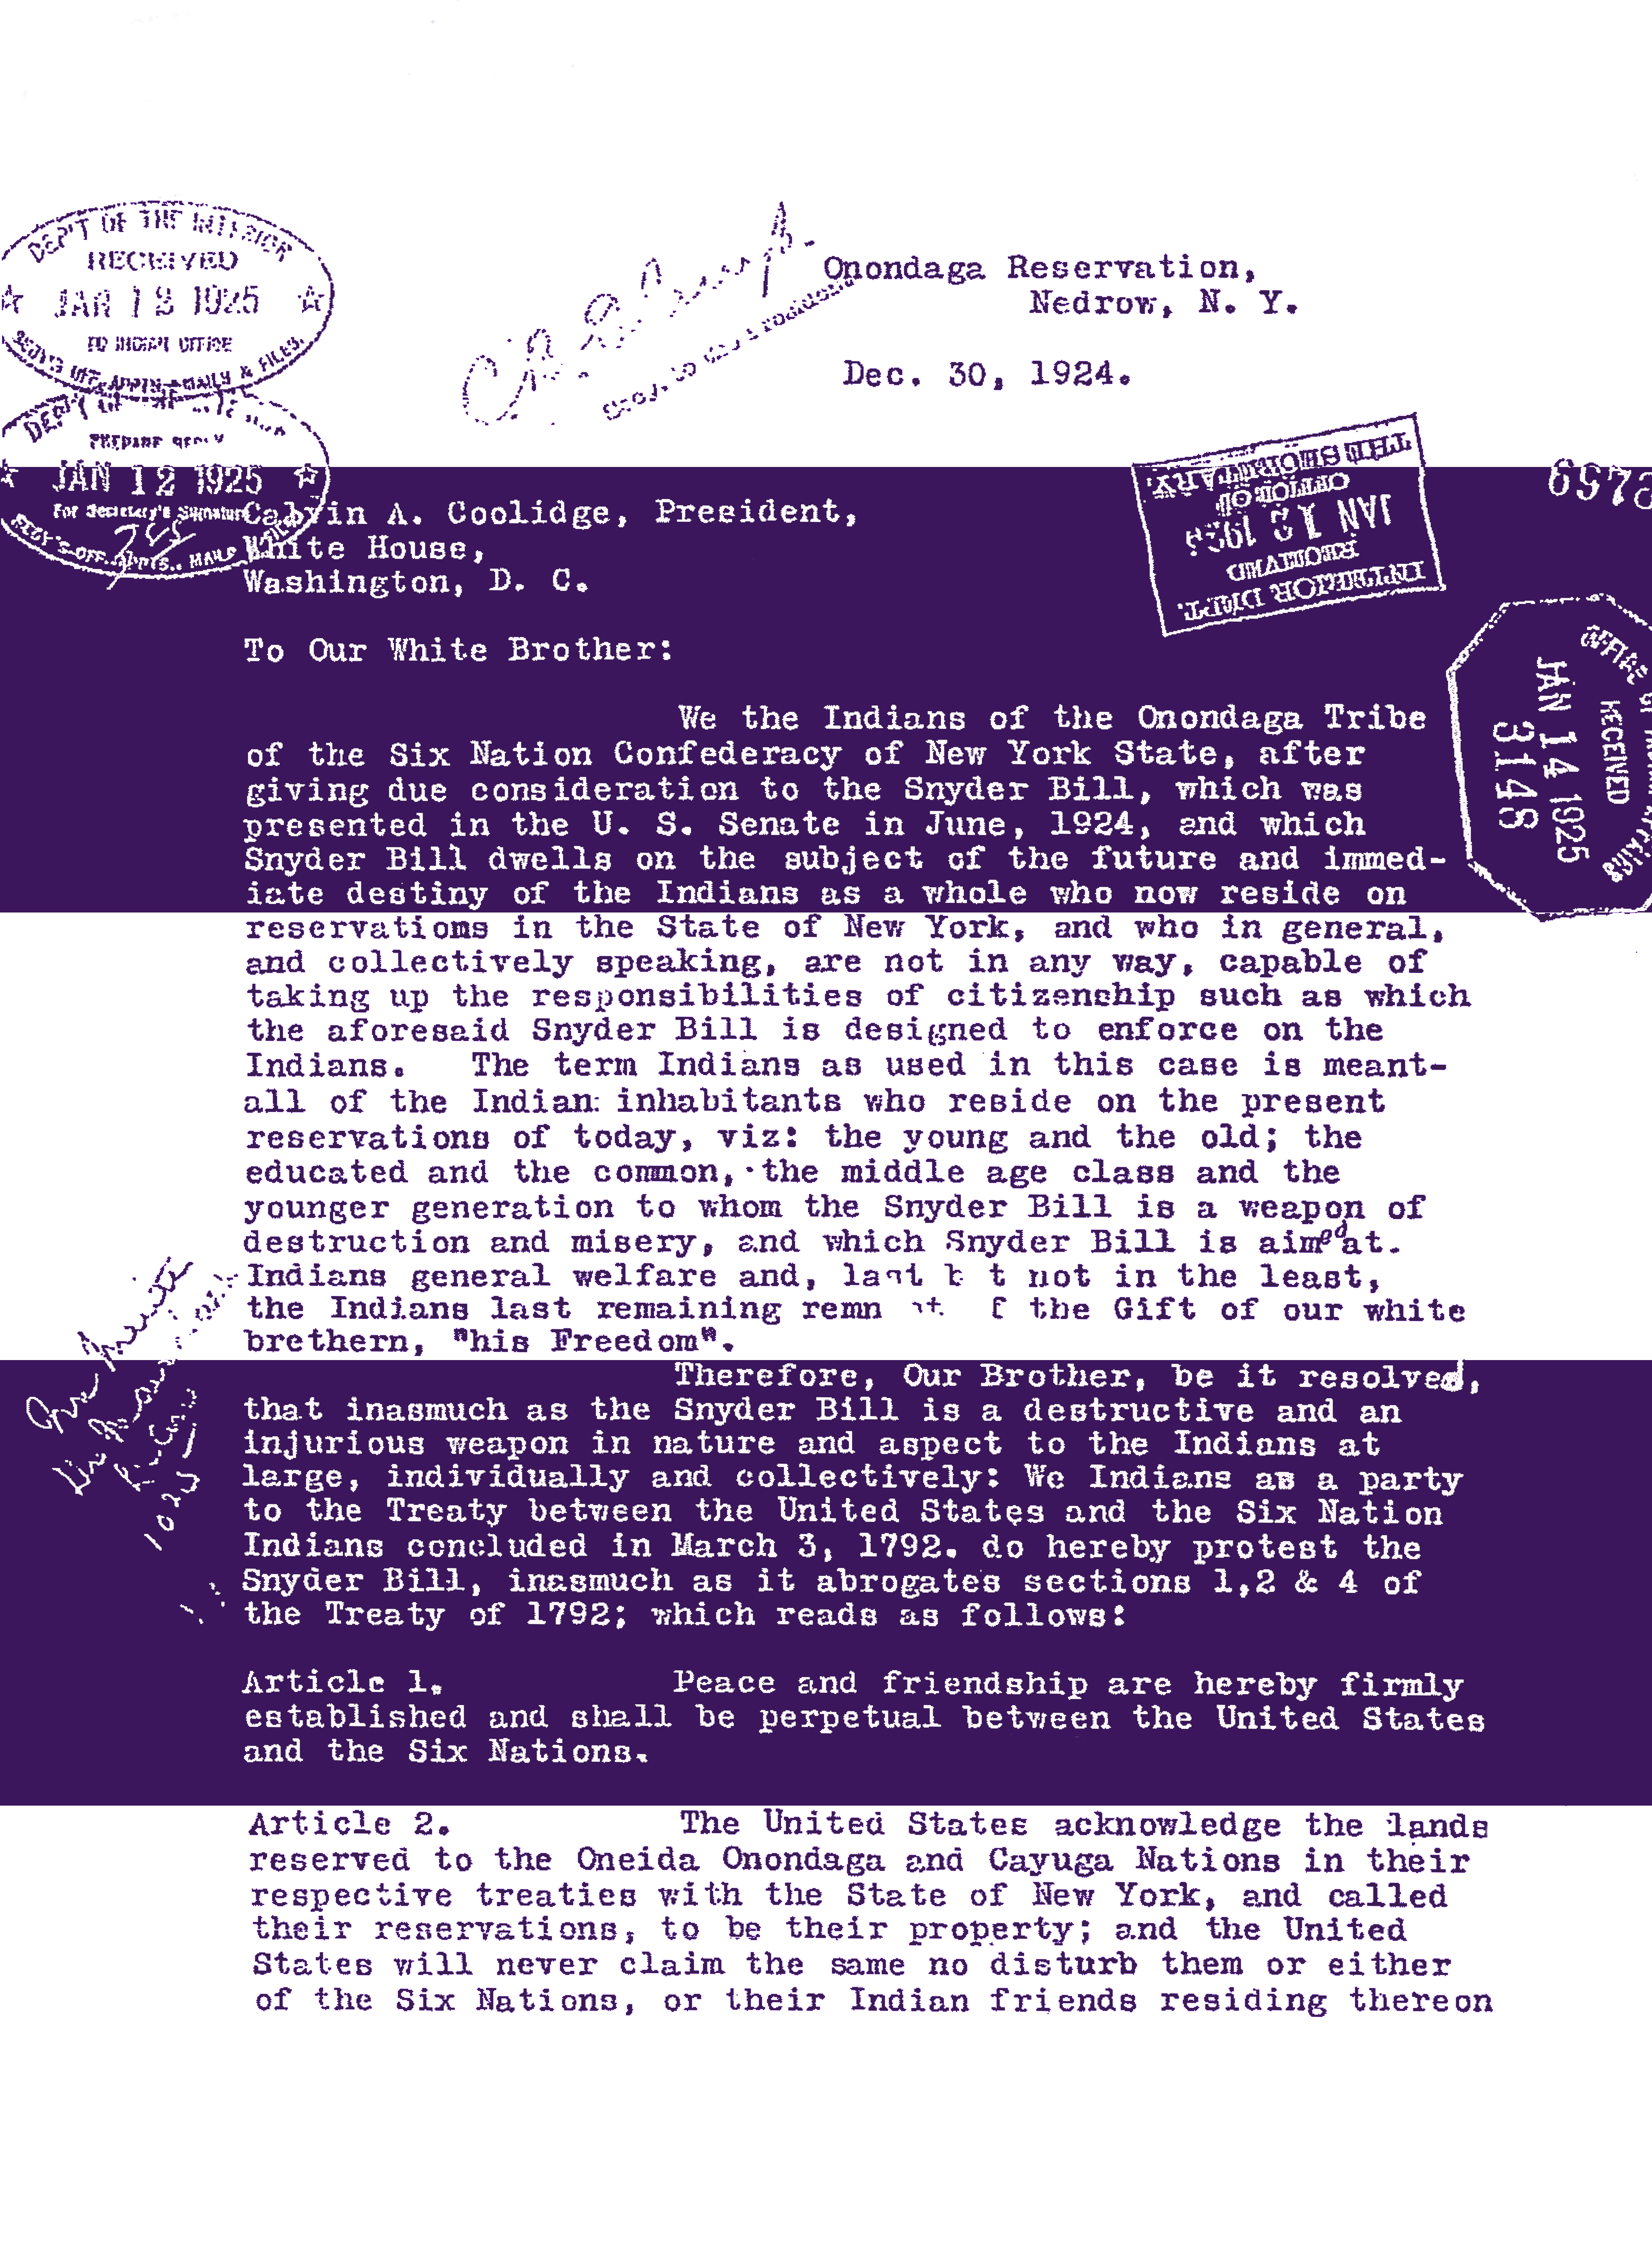 A white laser print on double-sided fleece blanket, that looks like a letter. It has two thick purple horizontal stripes on it. It is addressed to Calvin Coolidge. 